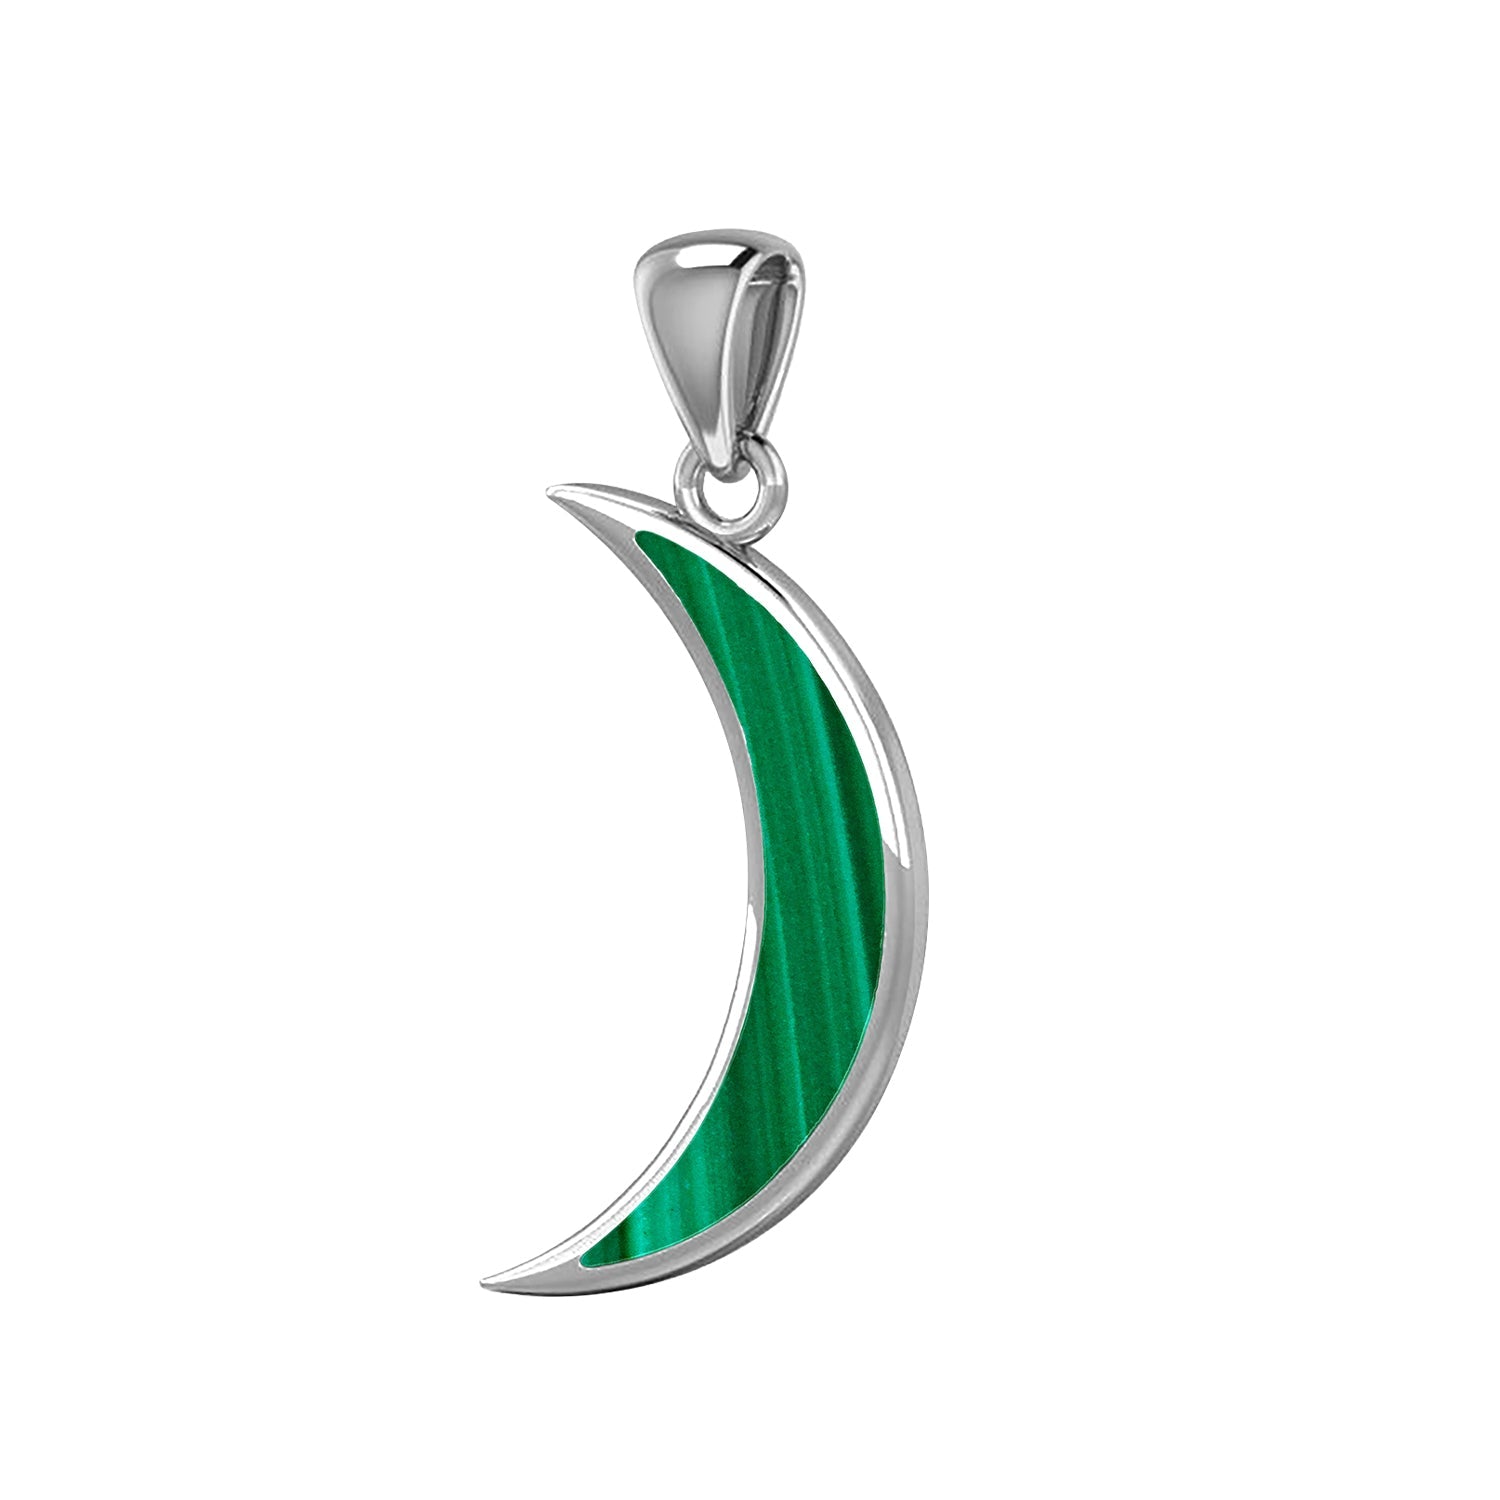 Ladies 925 Sterling Silver Simulated Malachite Magick Crescent Moon Pendant Necklace, 25mm - US Jewels